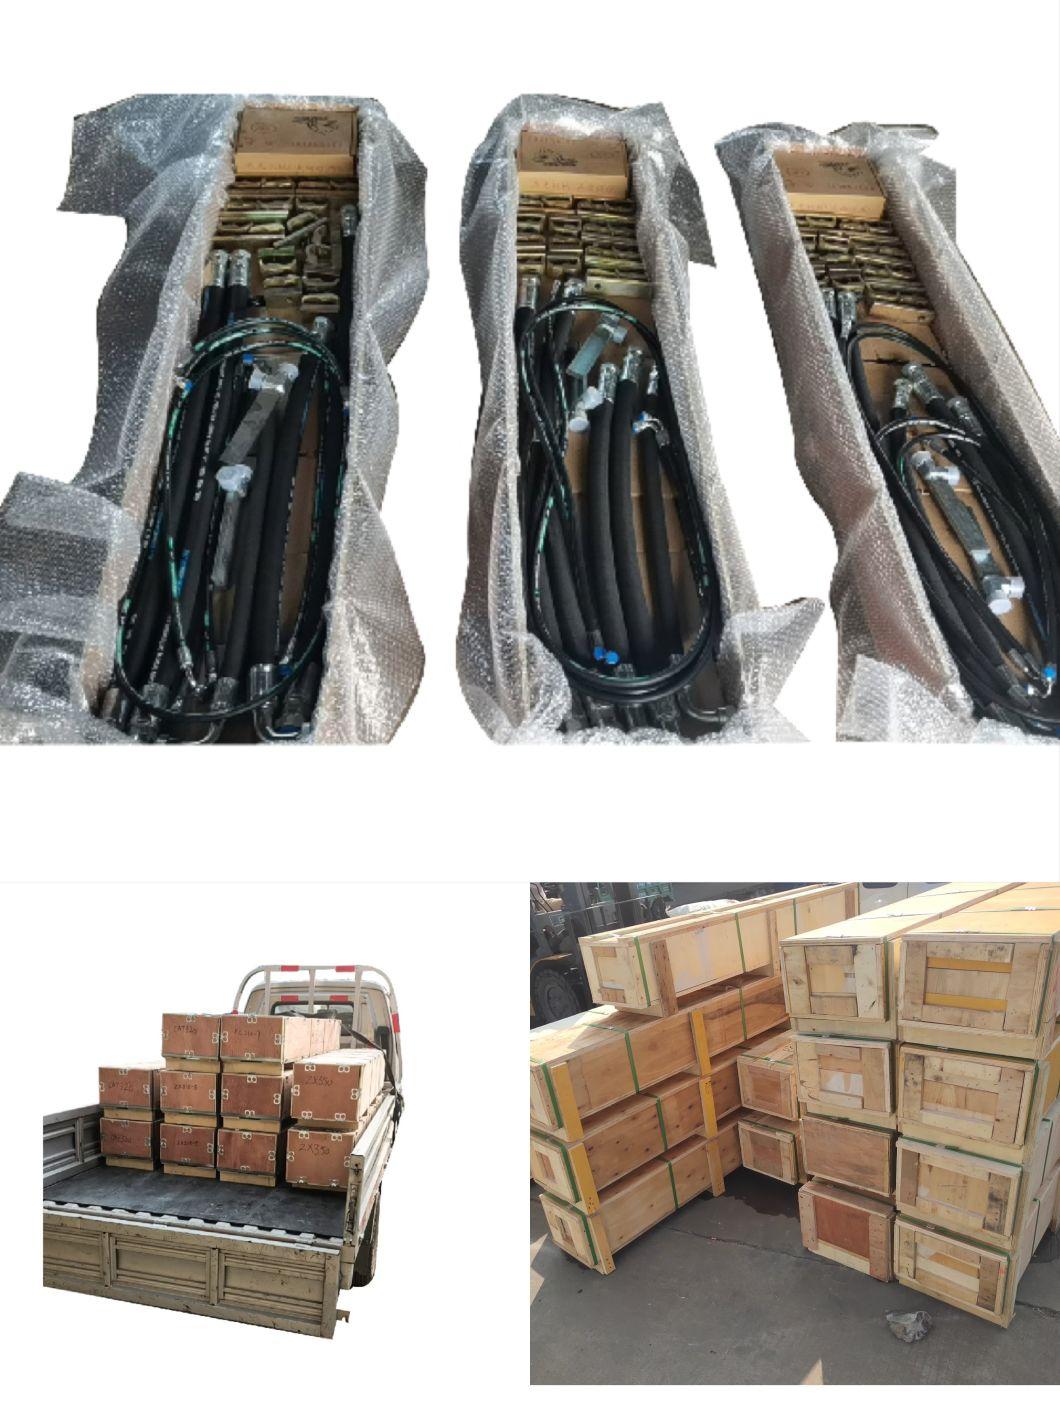 Pipes Hammer Installation Kit Boom Arm Bucket Hydraulic Oil Hose Piping Kits for Excavator